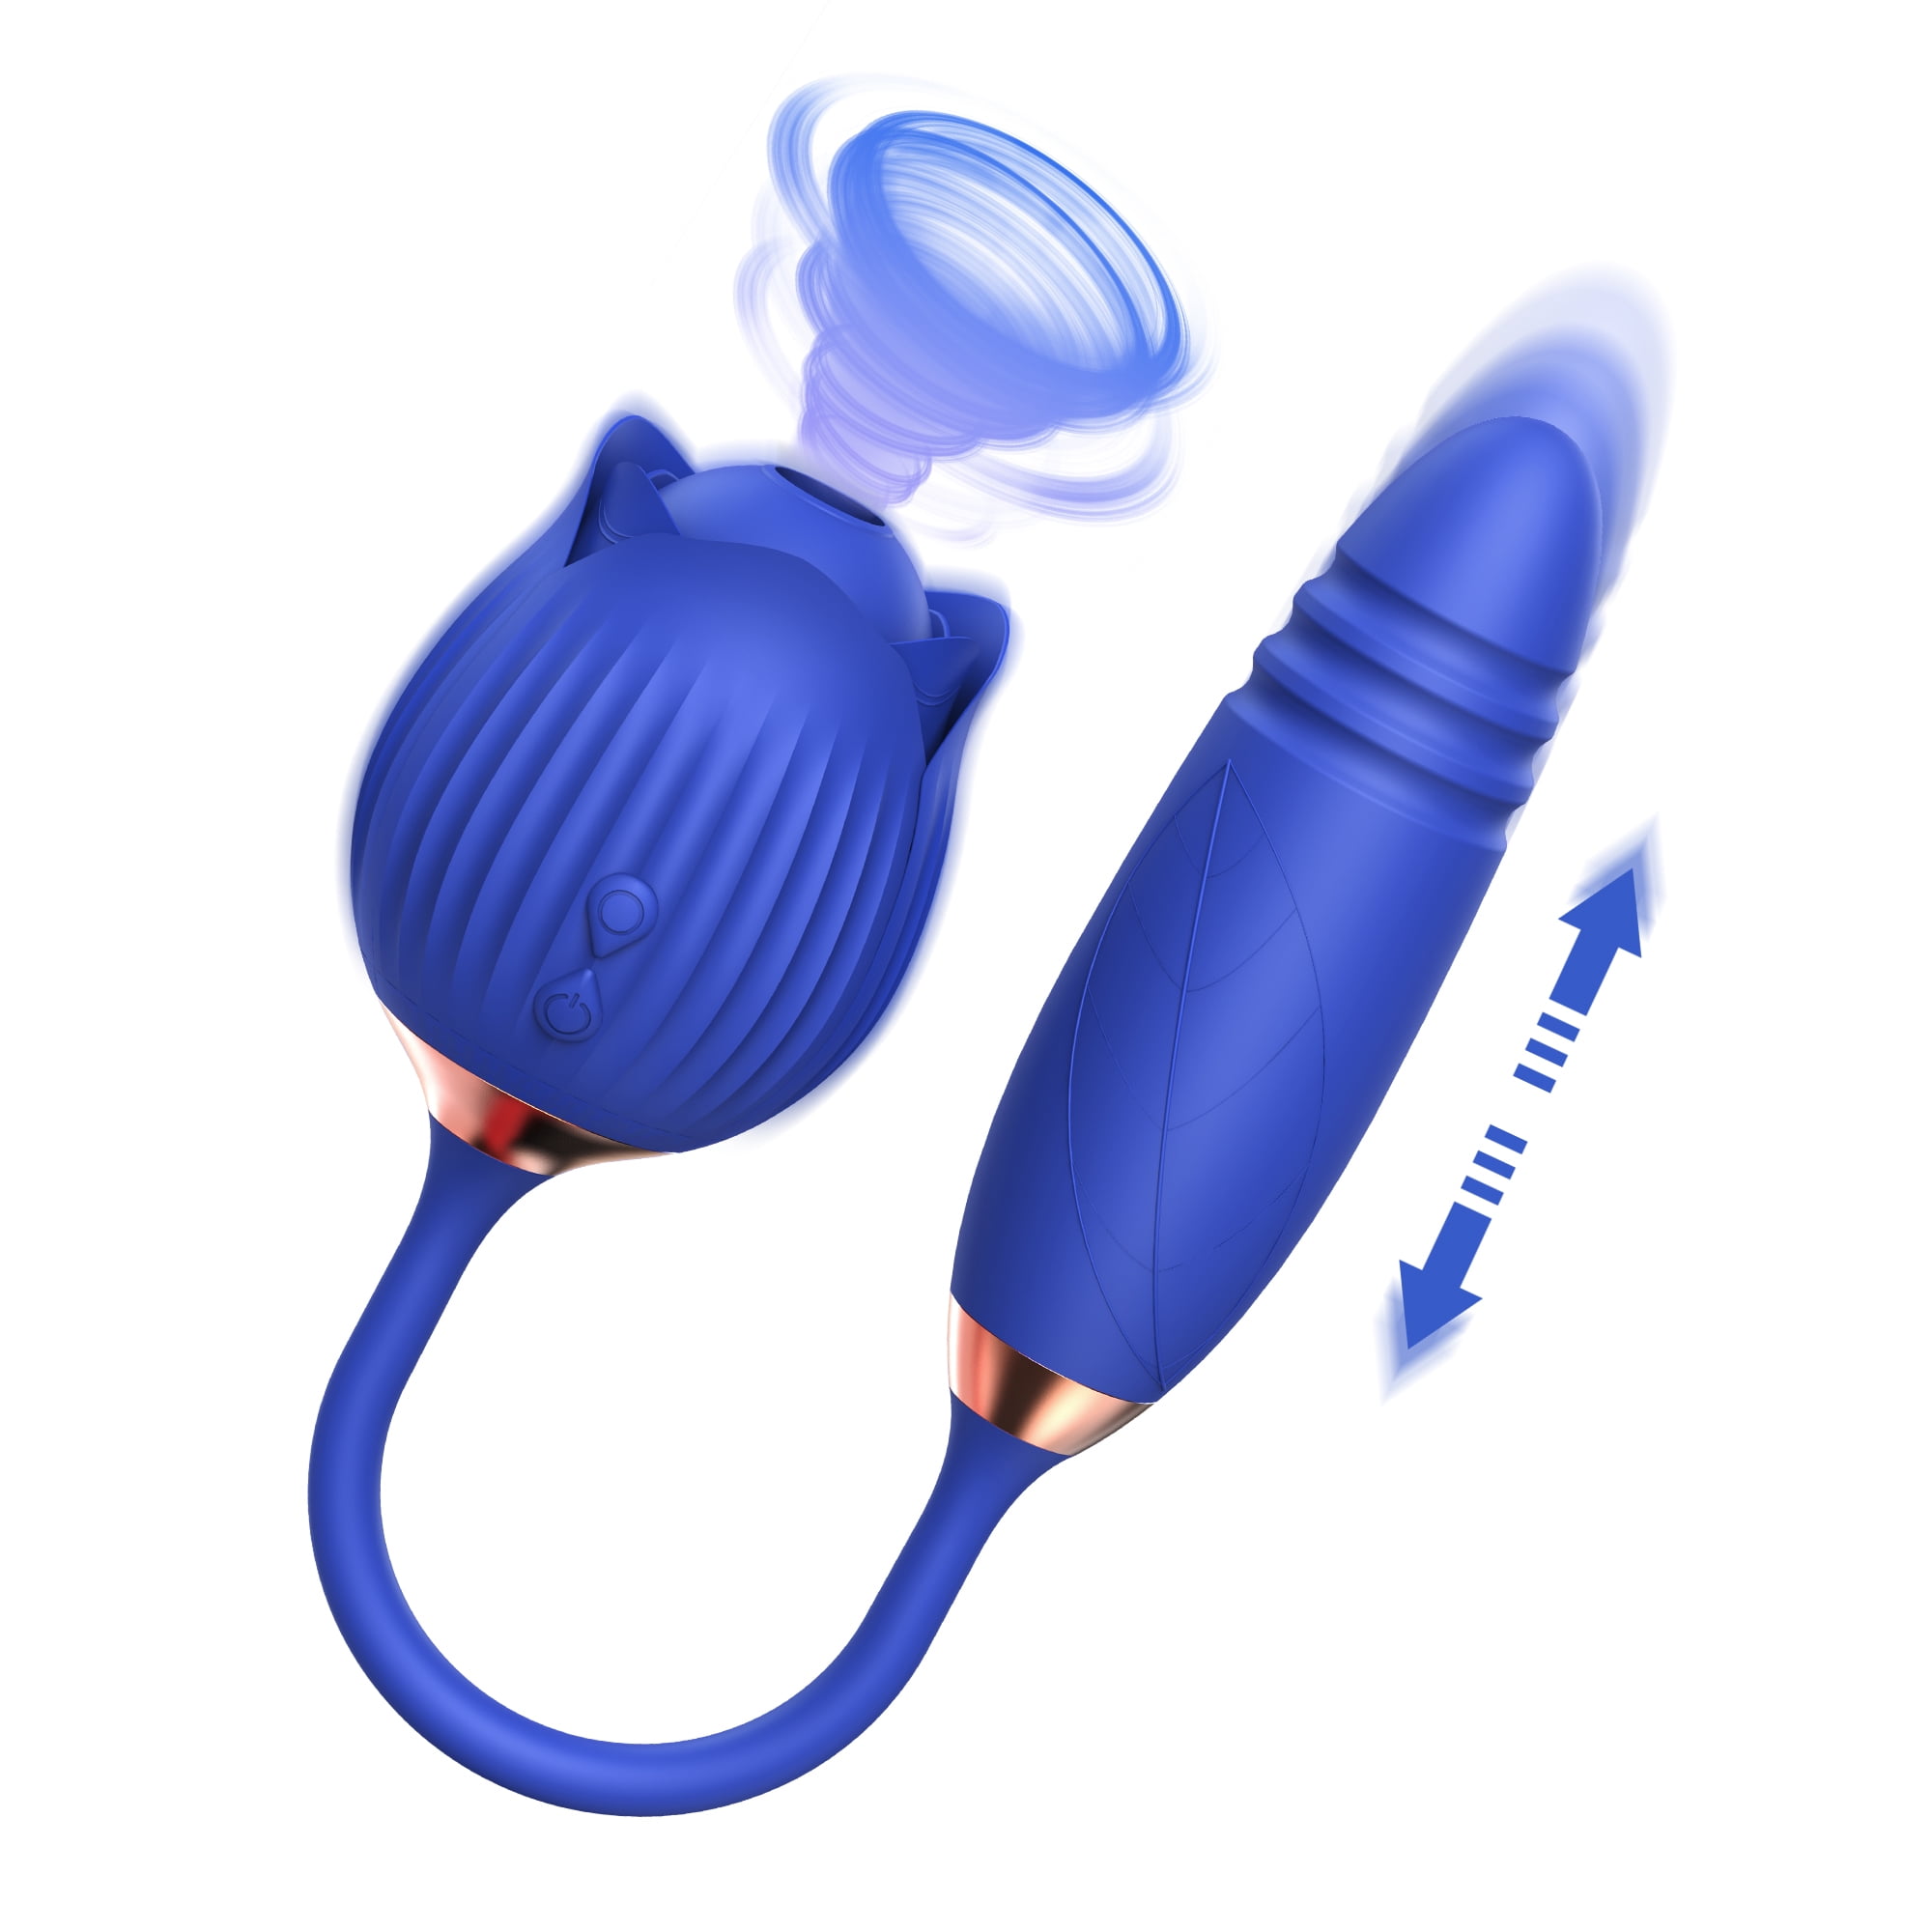 DARZU Rose Adult Sex Toys - Vibrator G Spot Stimulator with Thrusting Dildo for Woman Couples - Blue pic